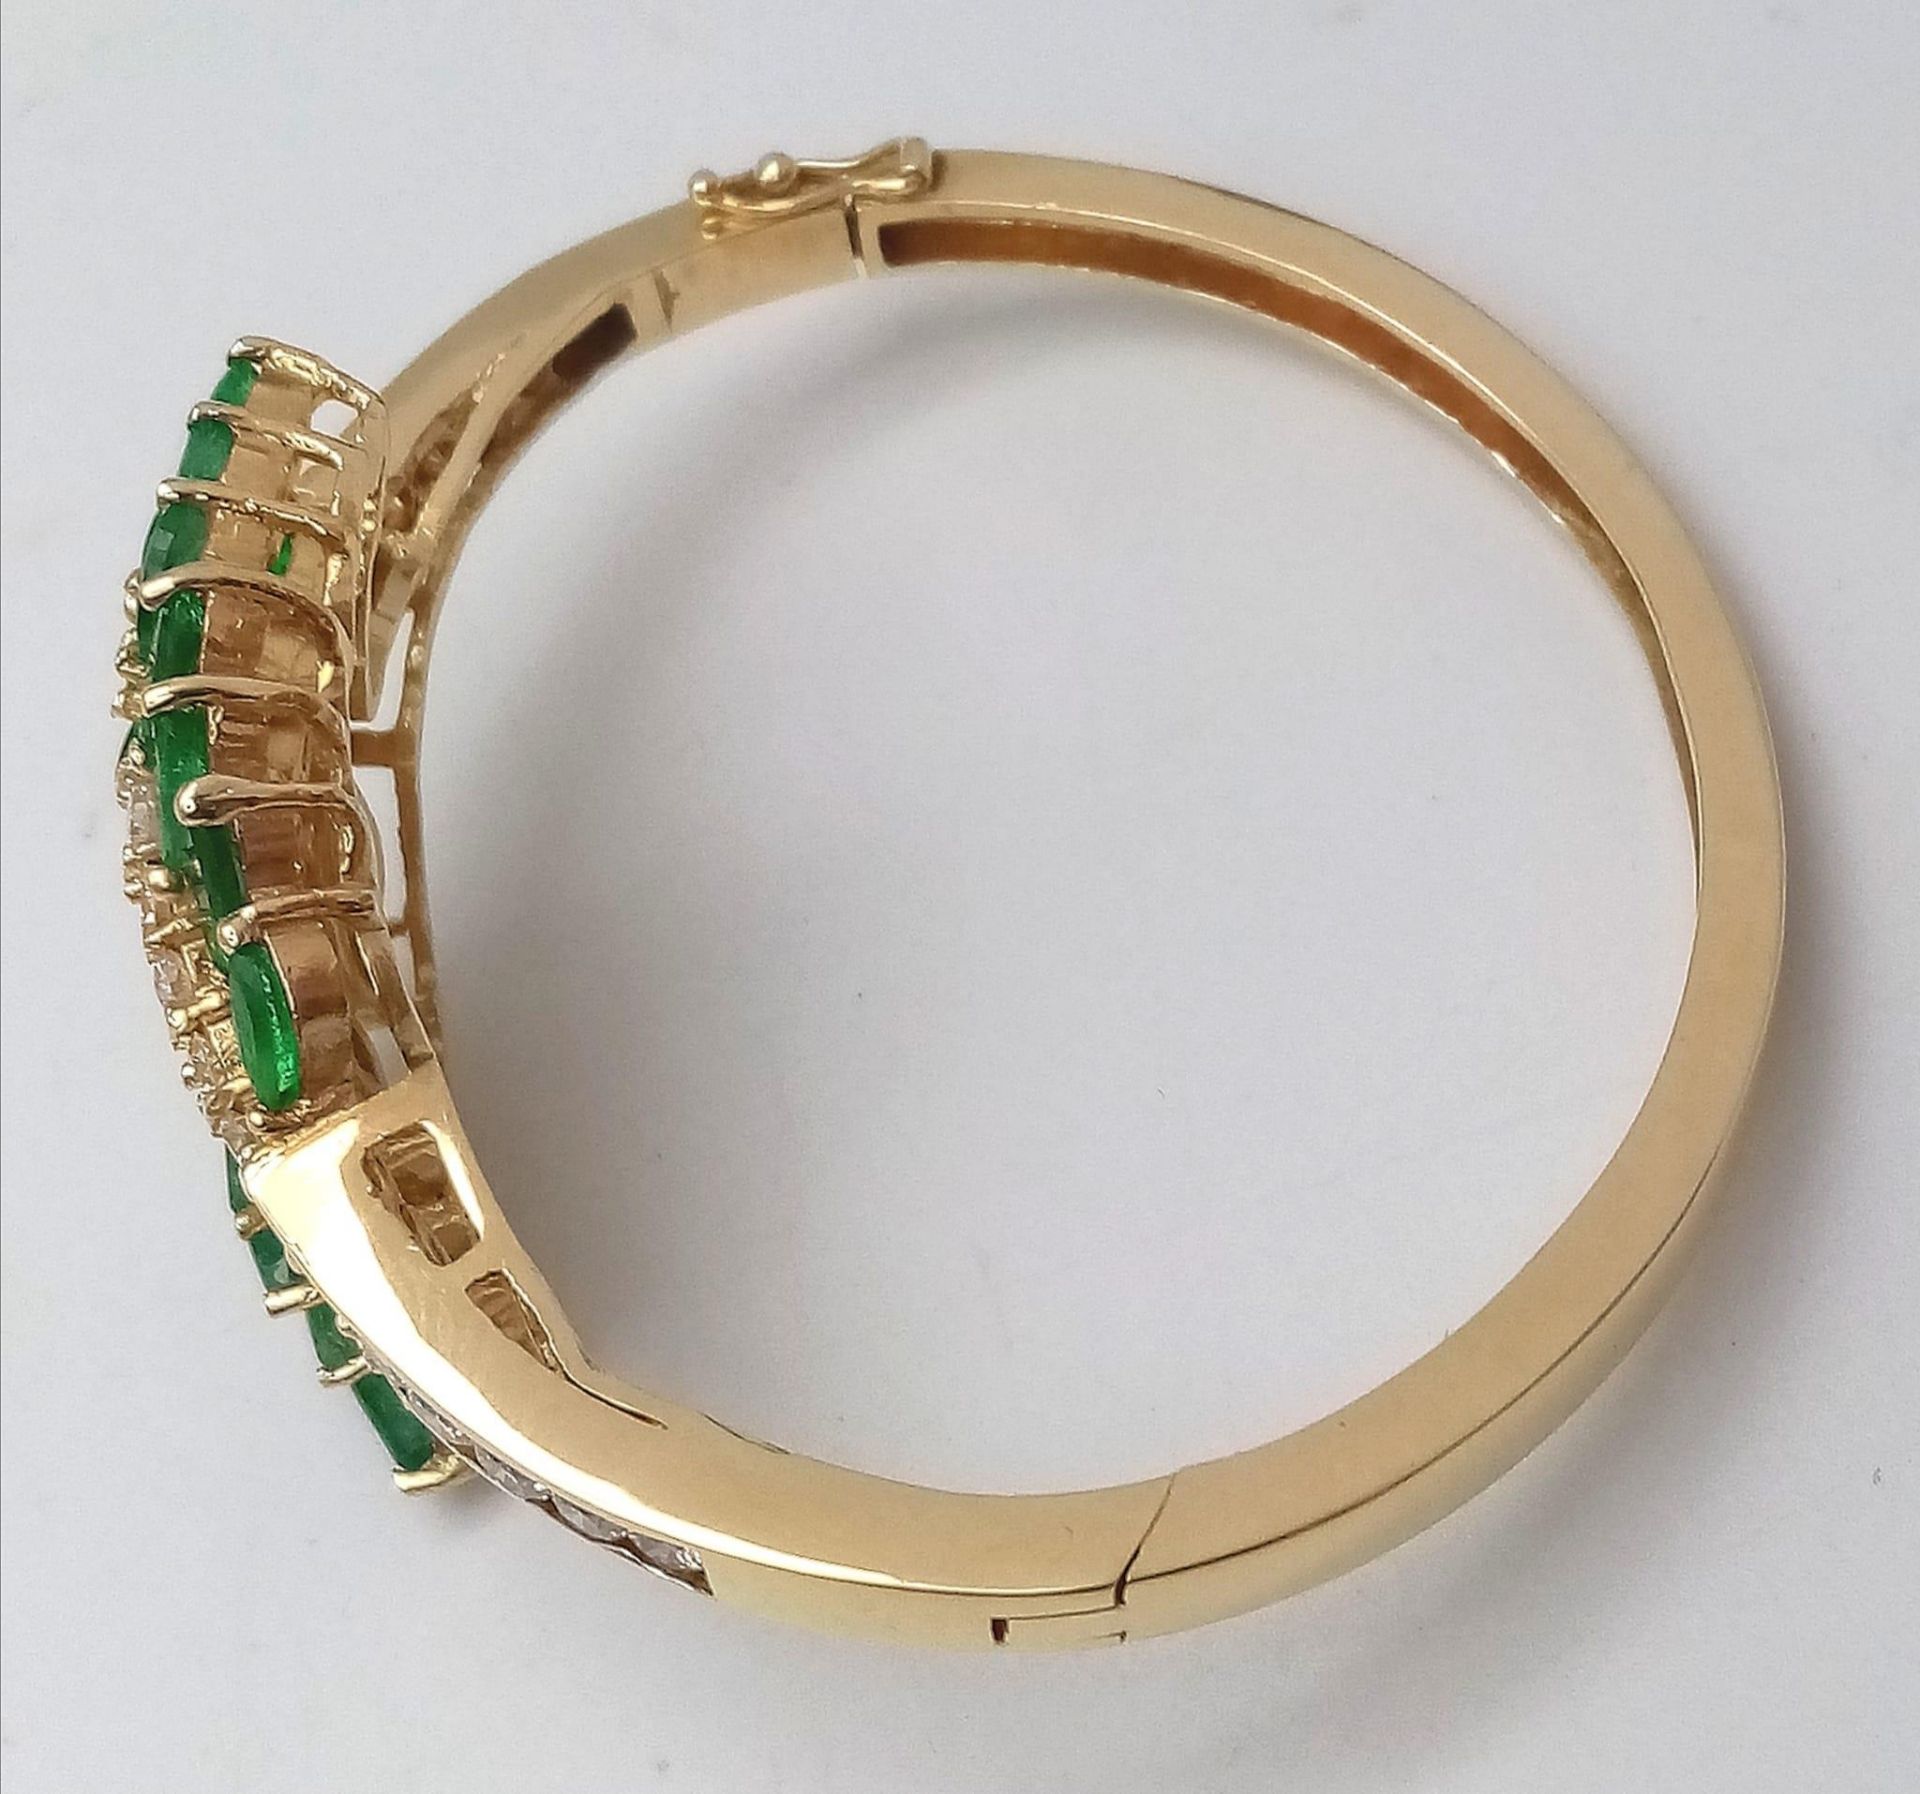 A DIAMOND AND EMERALD LEAF DESIGN BANGLE IN CROSSOVER STYLE SET IN18K GOLD . 33.5gms 10457 - Image 12 of 15